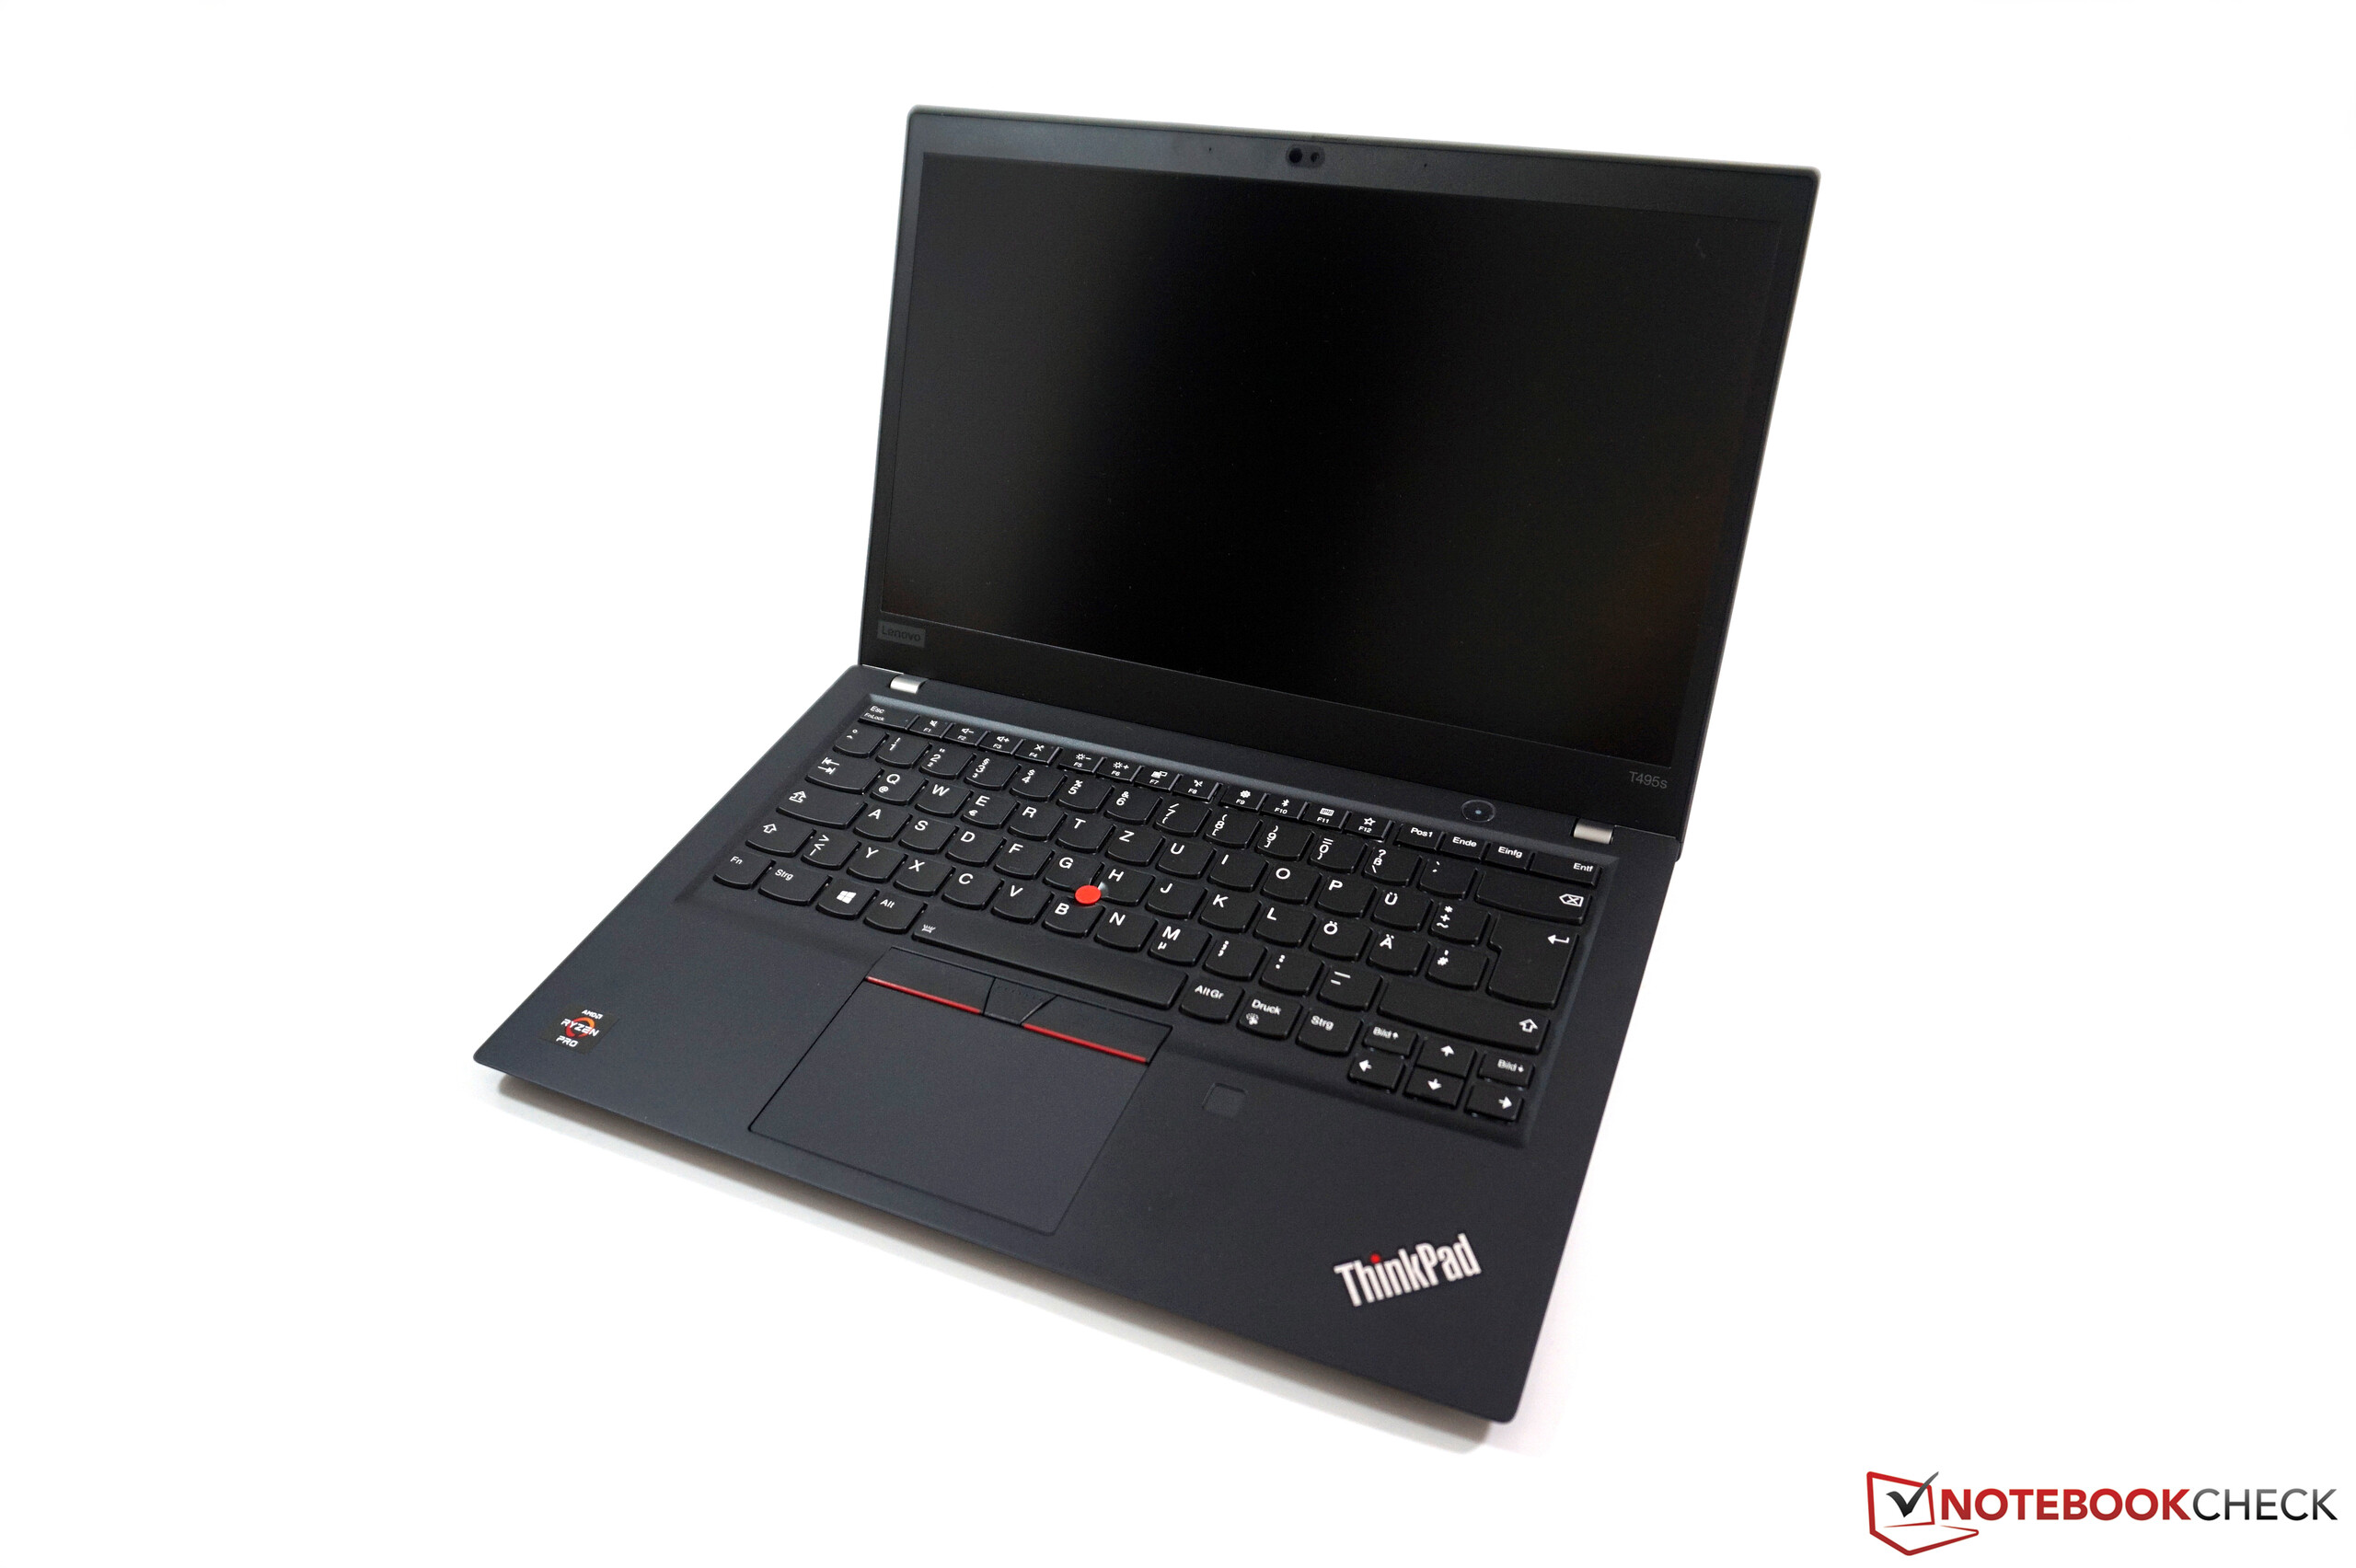 Lenovo ThinkPad T495s Review: The AMD business laptop is good, but 